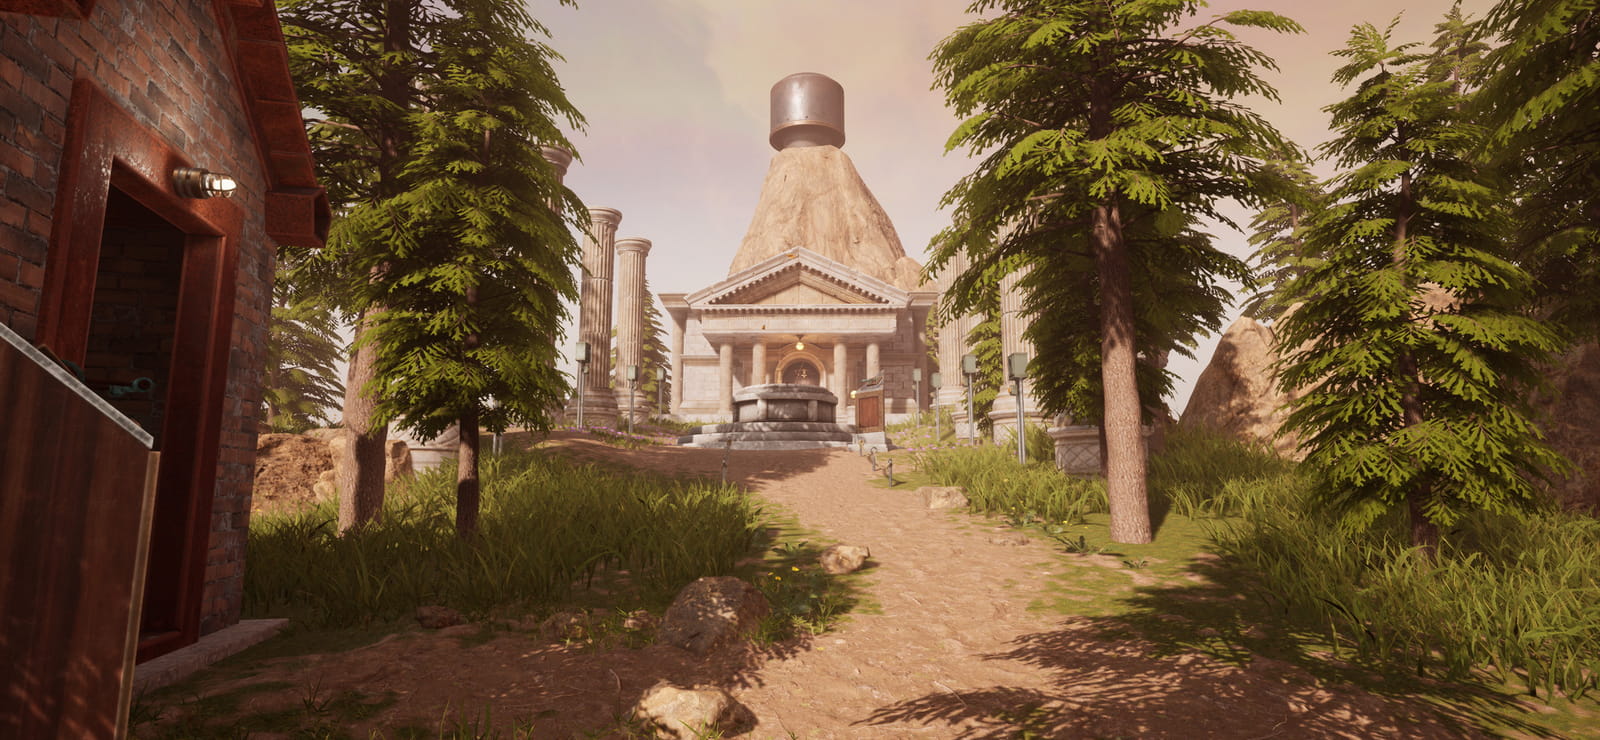 Myst: Through The Ages